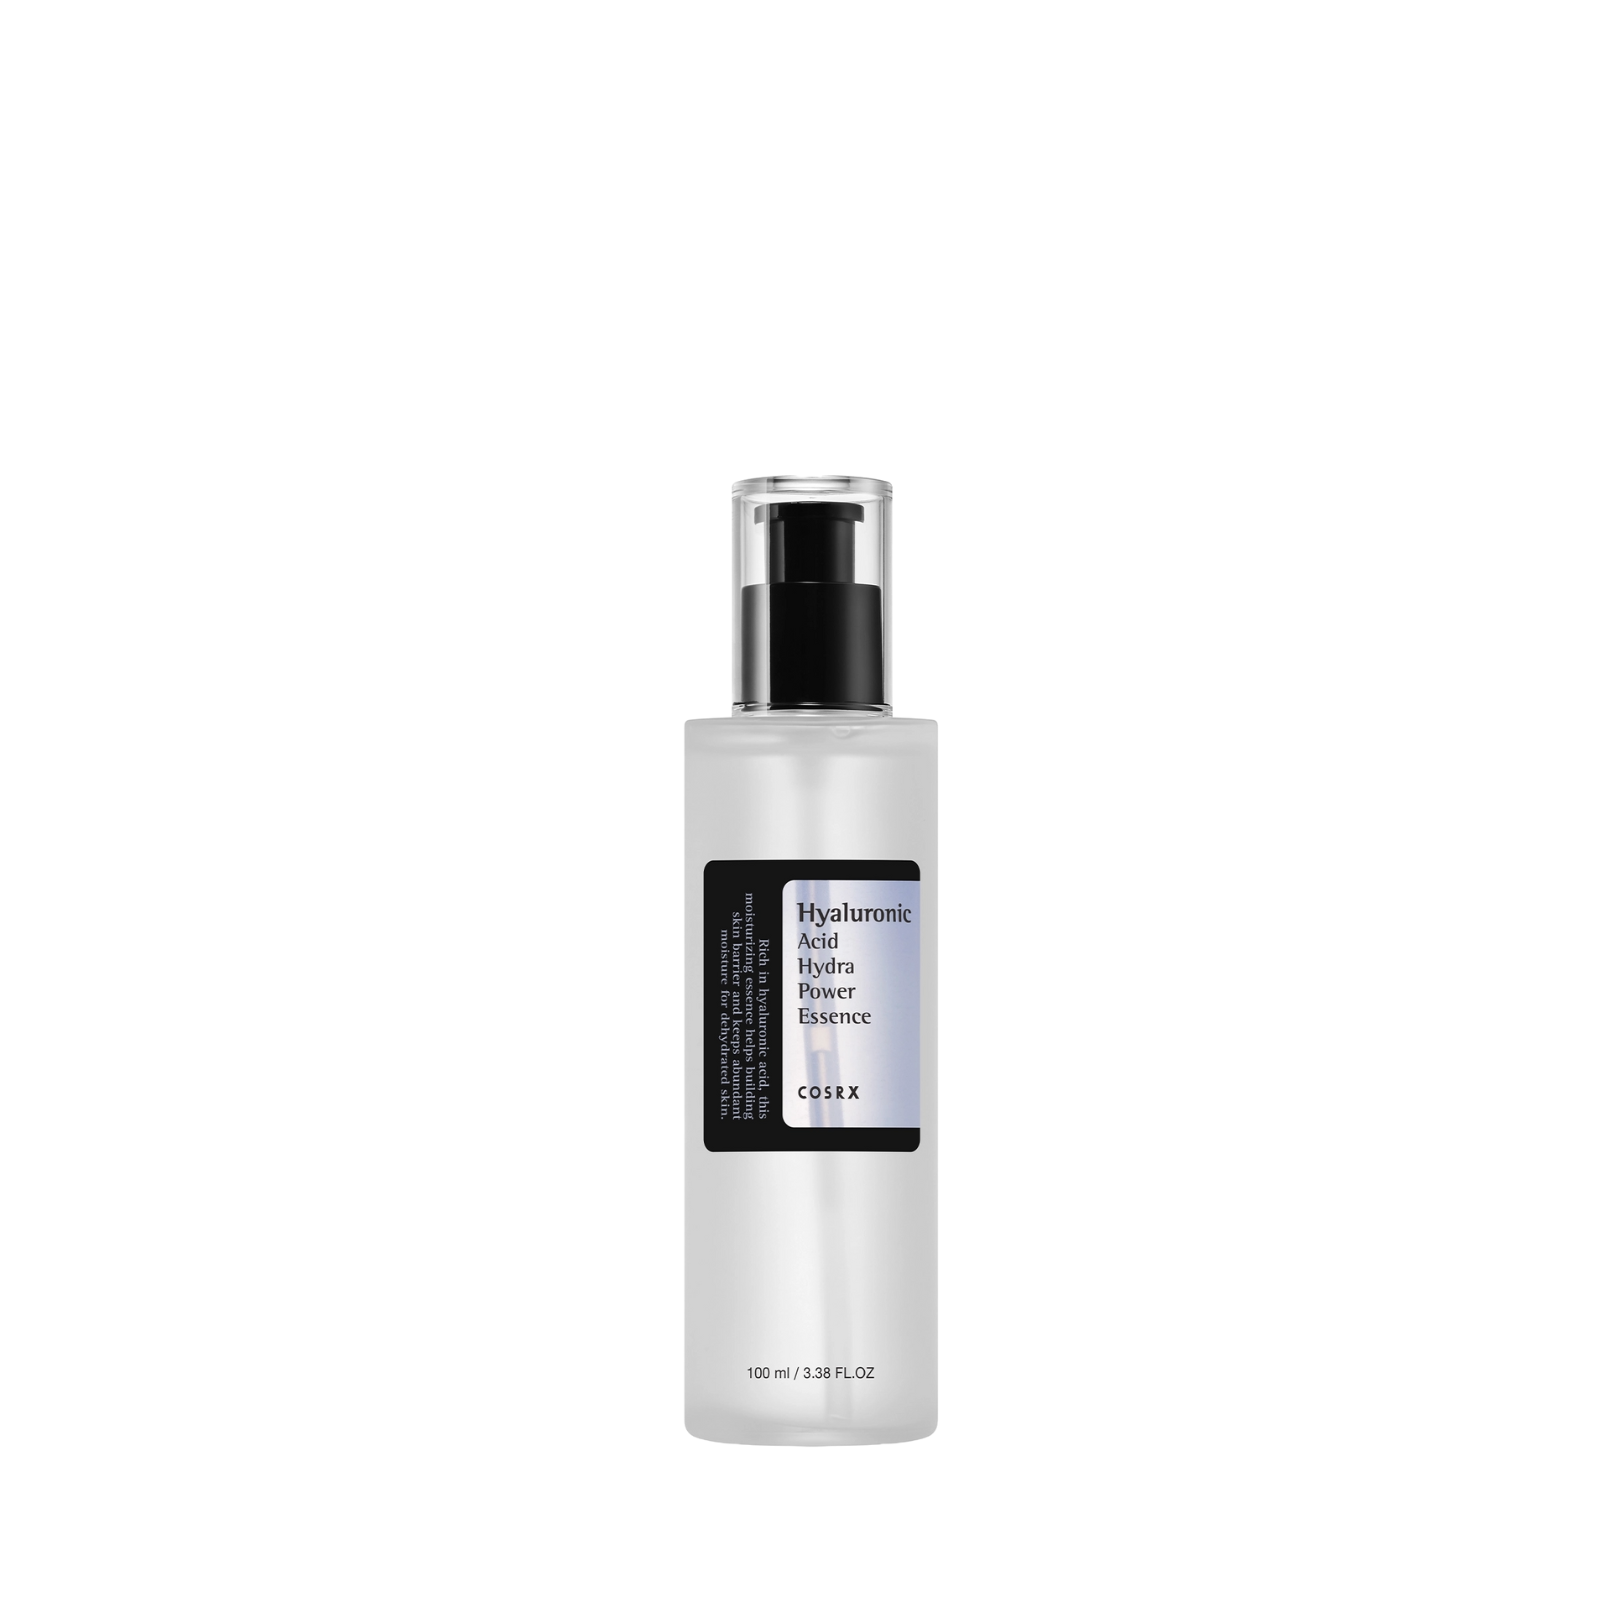 Moisturizing essence with hyaluronic acid by Cosrx (Cosrx Hyaluronic Acid Hydra Power Essence)